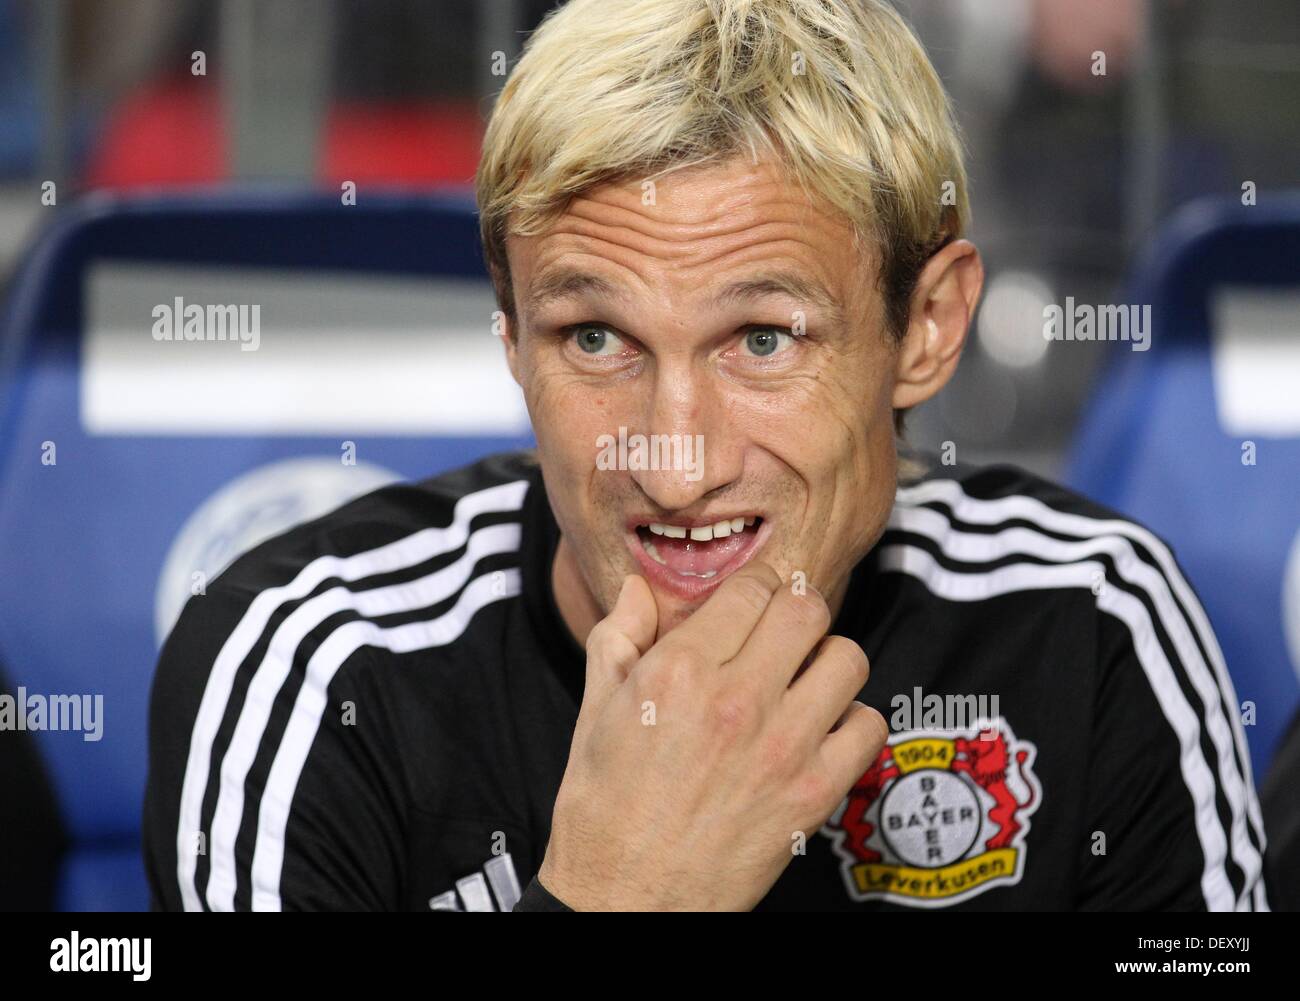 Bielefeld, Germany. 24th Sep, 2013. Leverkusen's head coach Sami Hyypia during the DFB Cup match between Arminia Bielefeld and Bayer Leverkusen at Schueco Arena in Bielefeld, Germany, 24 September 2013. Photo: FRISO GENTSCH/dpa/Alamy Live News Stock Photo